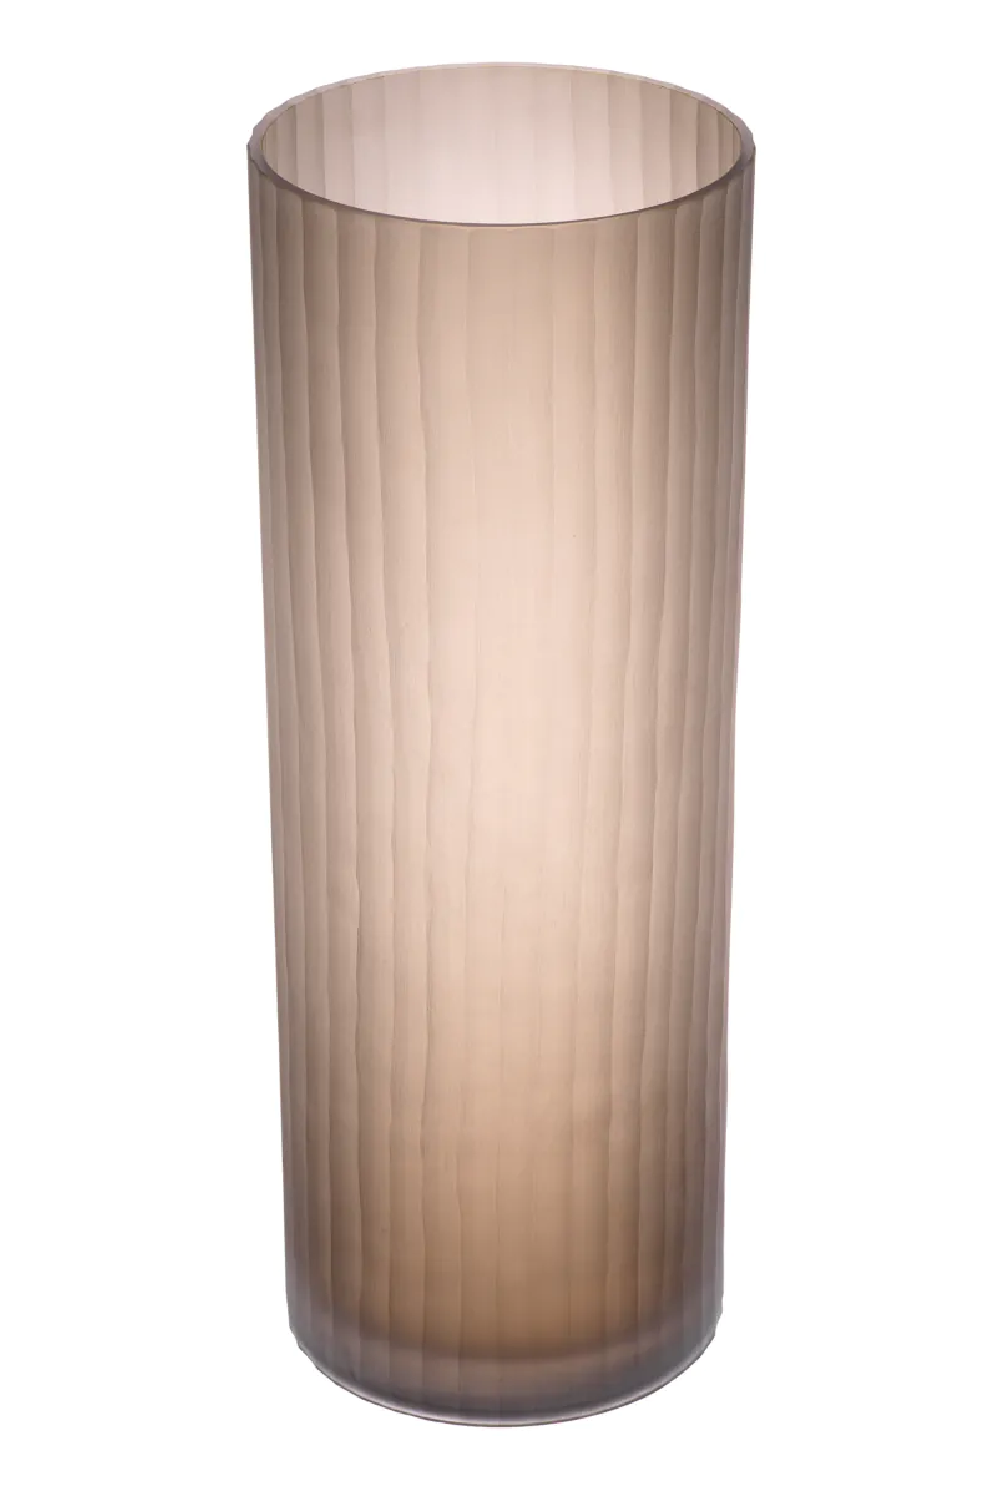 Brown Frosted Glass Vase | Eichholtz Haight | Oroa.com